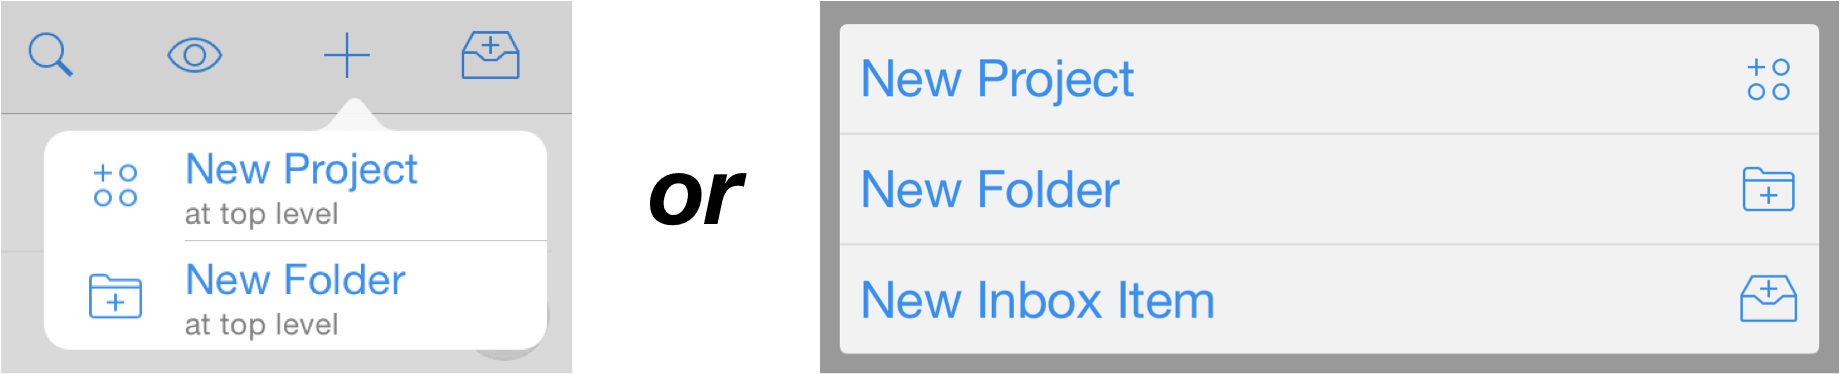 Adding a new folder in OmniFocus for iOS on iPad and iPhone.